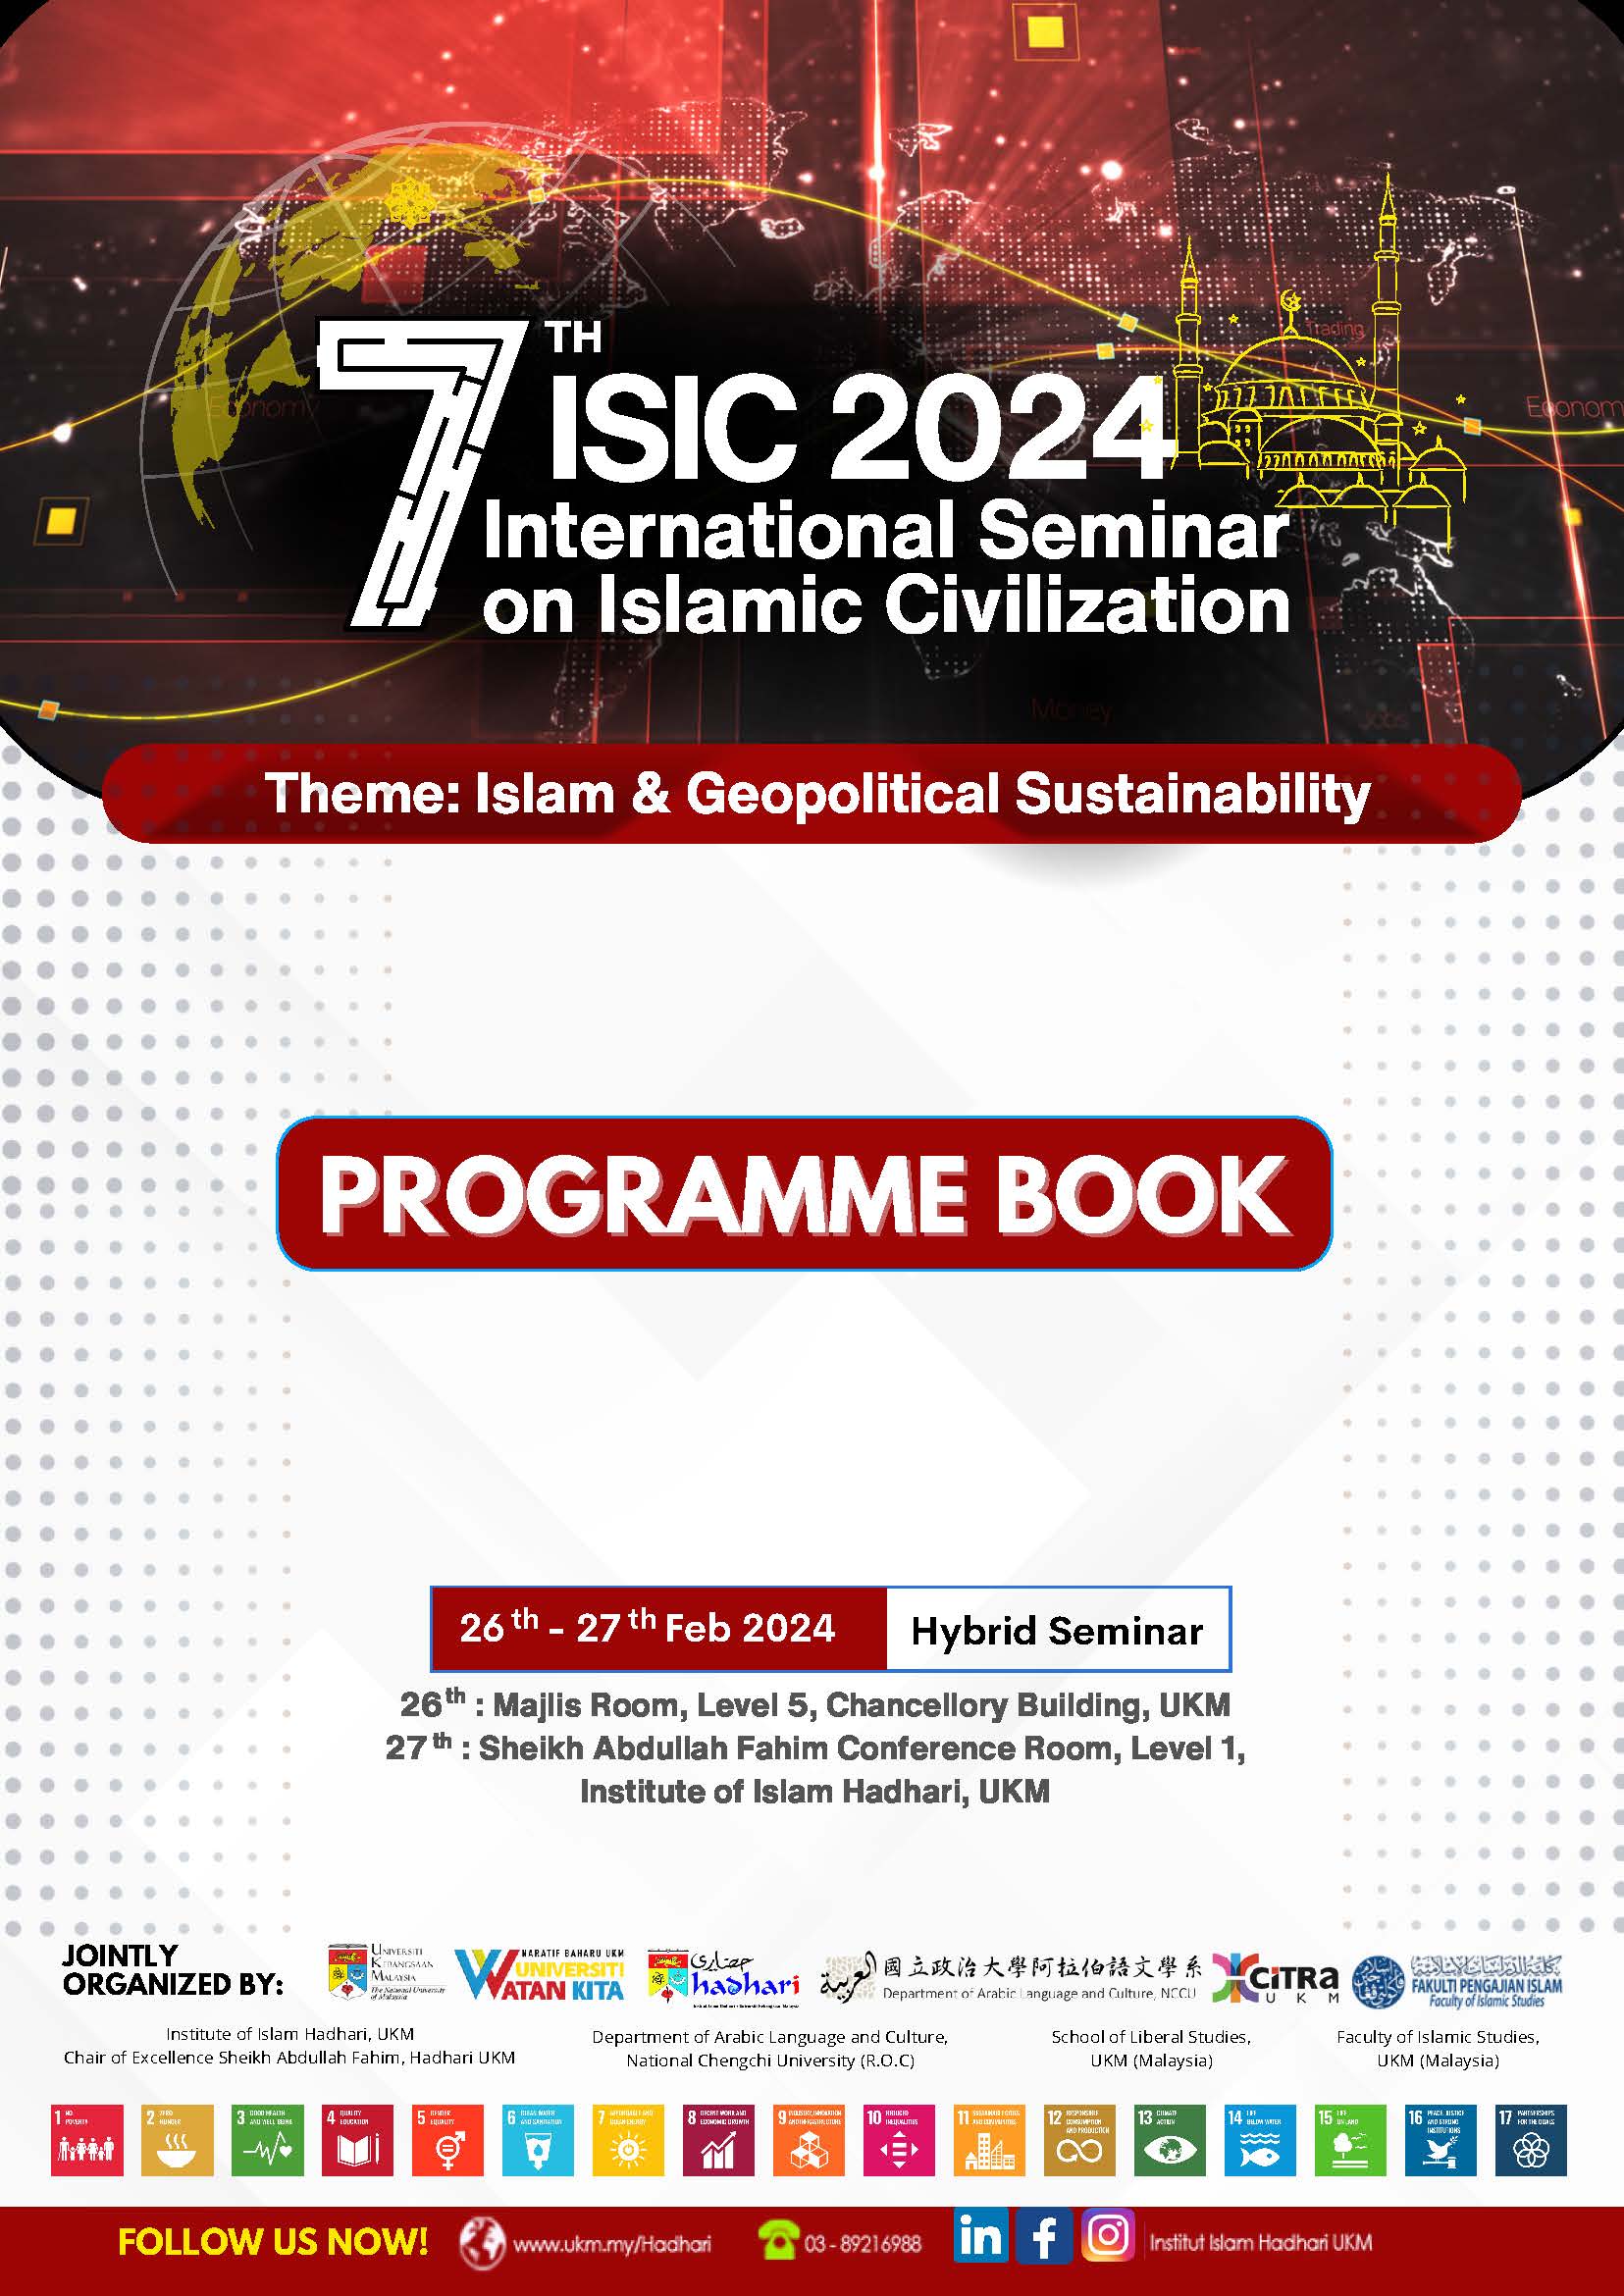 【ISIC 2024】AN INVITATION TO COOPERATE IN THE 7TH INTERNATIONAL SEMINAR ON ISLAMIC CIVILIZATION